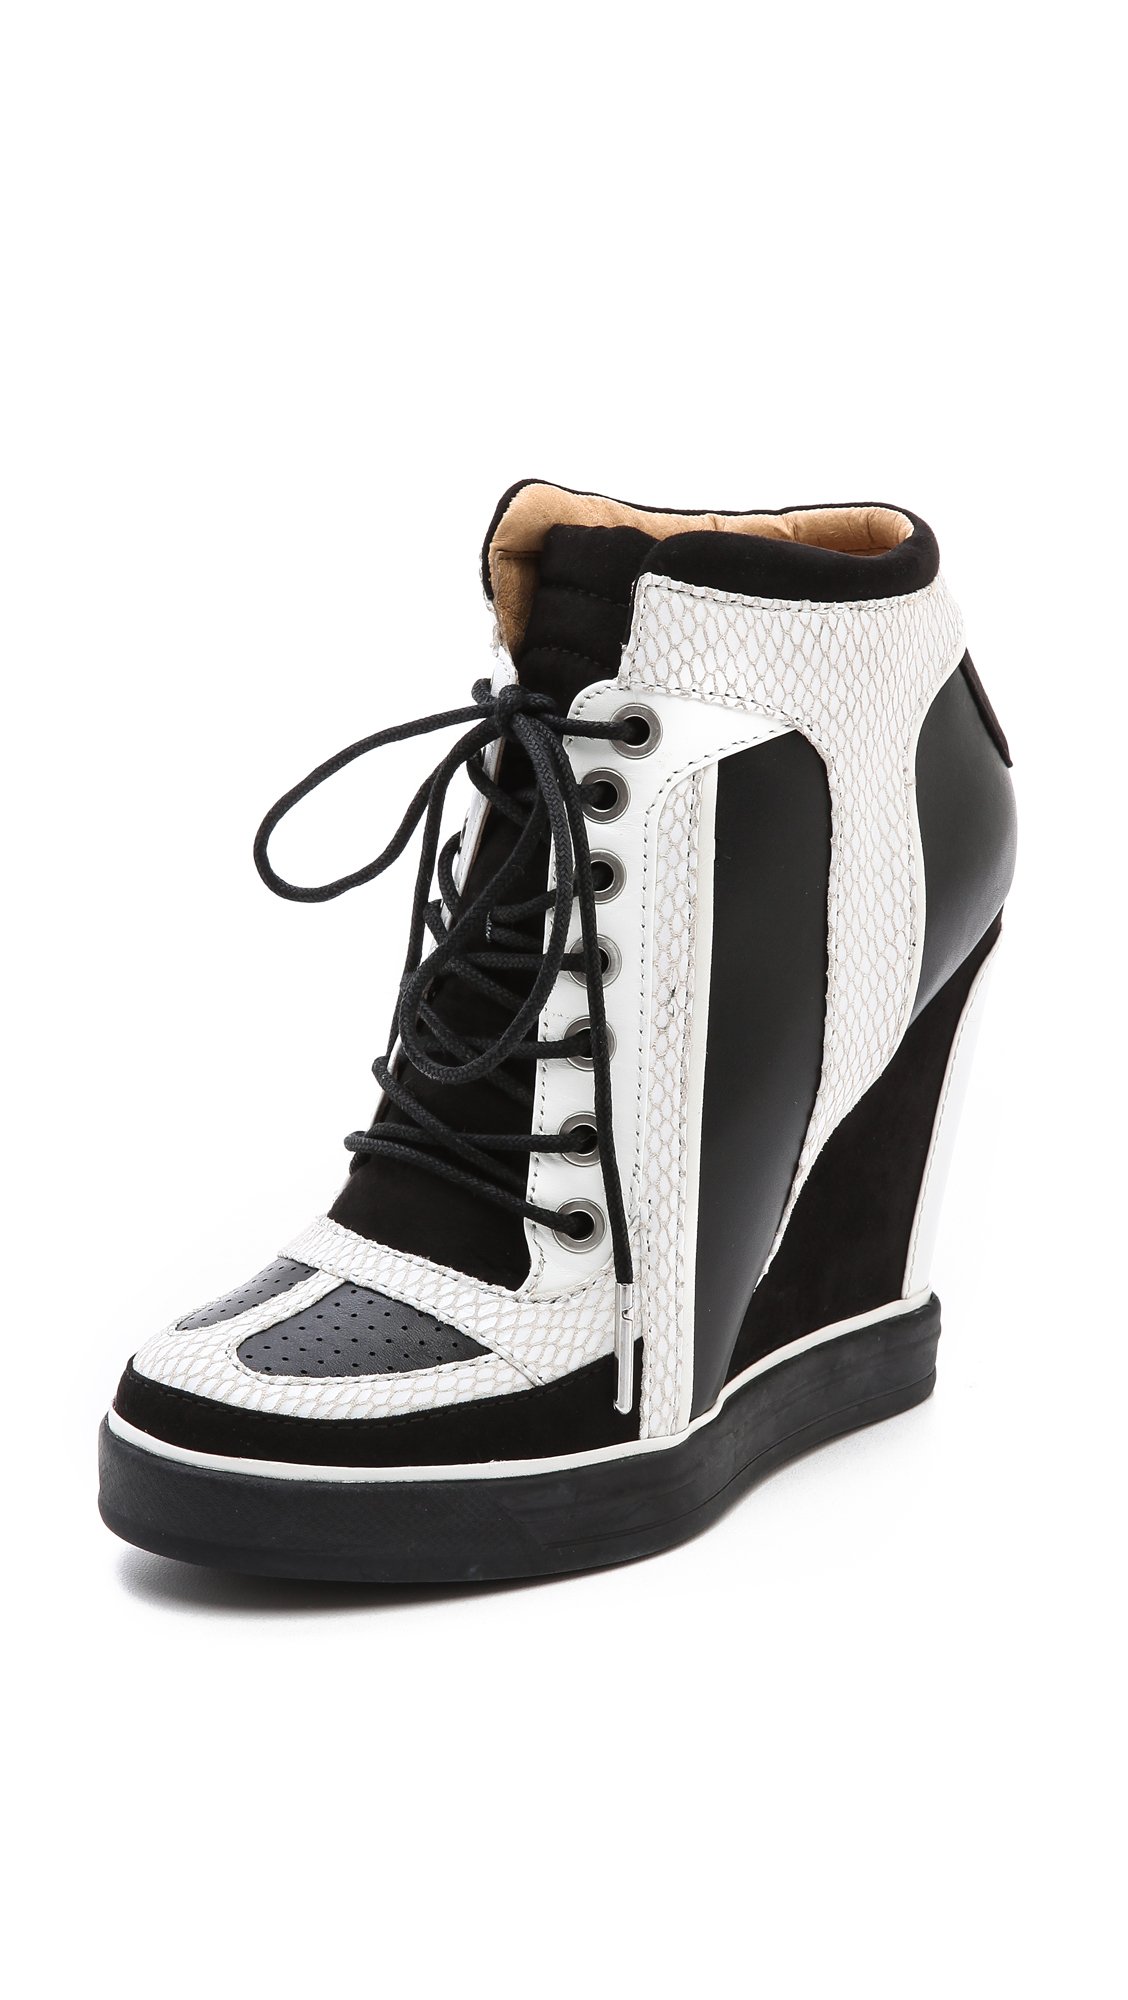 L.A.M.B. Summer Lace Up Wedge Sneakers in Black | Lyst Canada